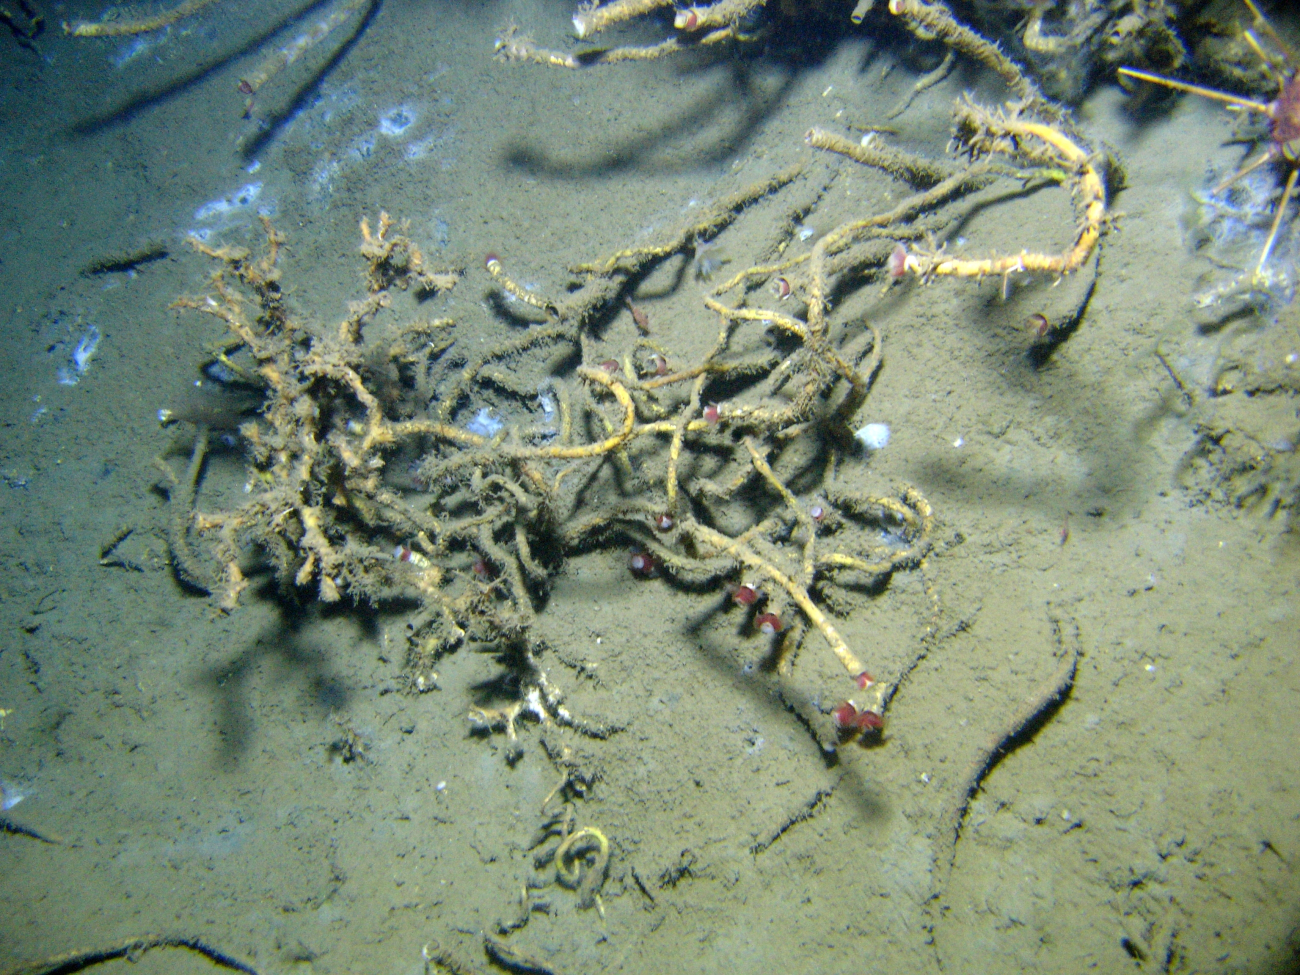 A cold seep site with lamellibrachian tube worms